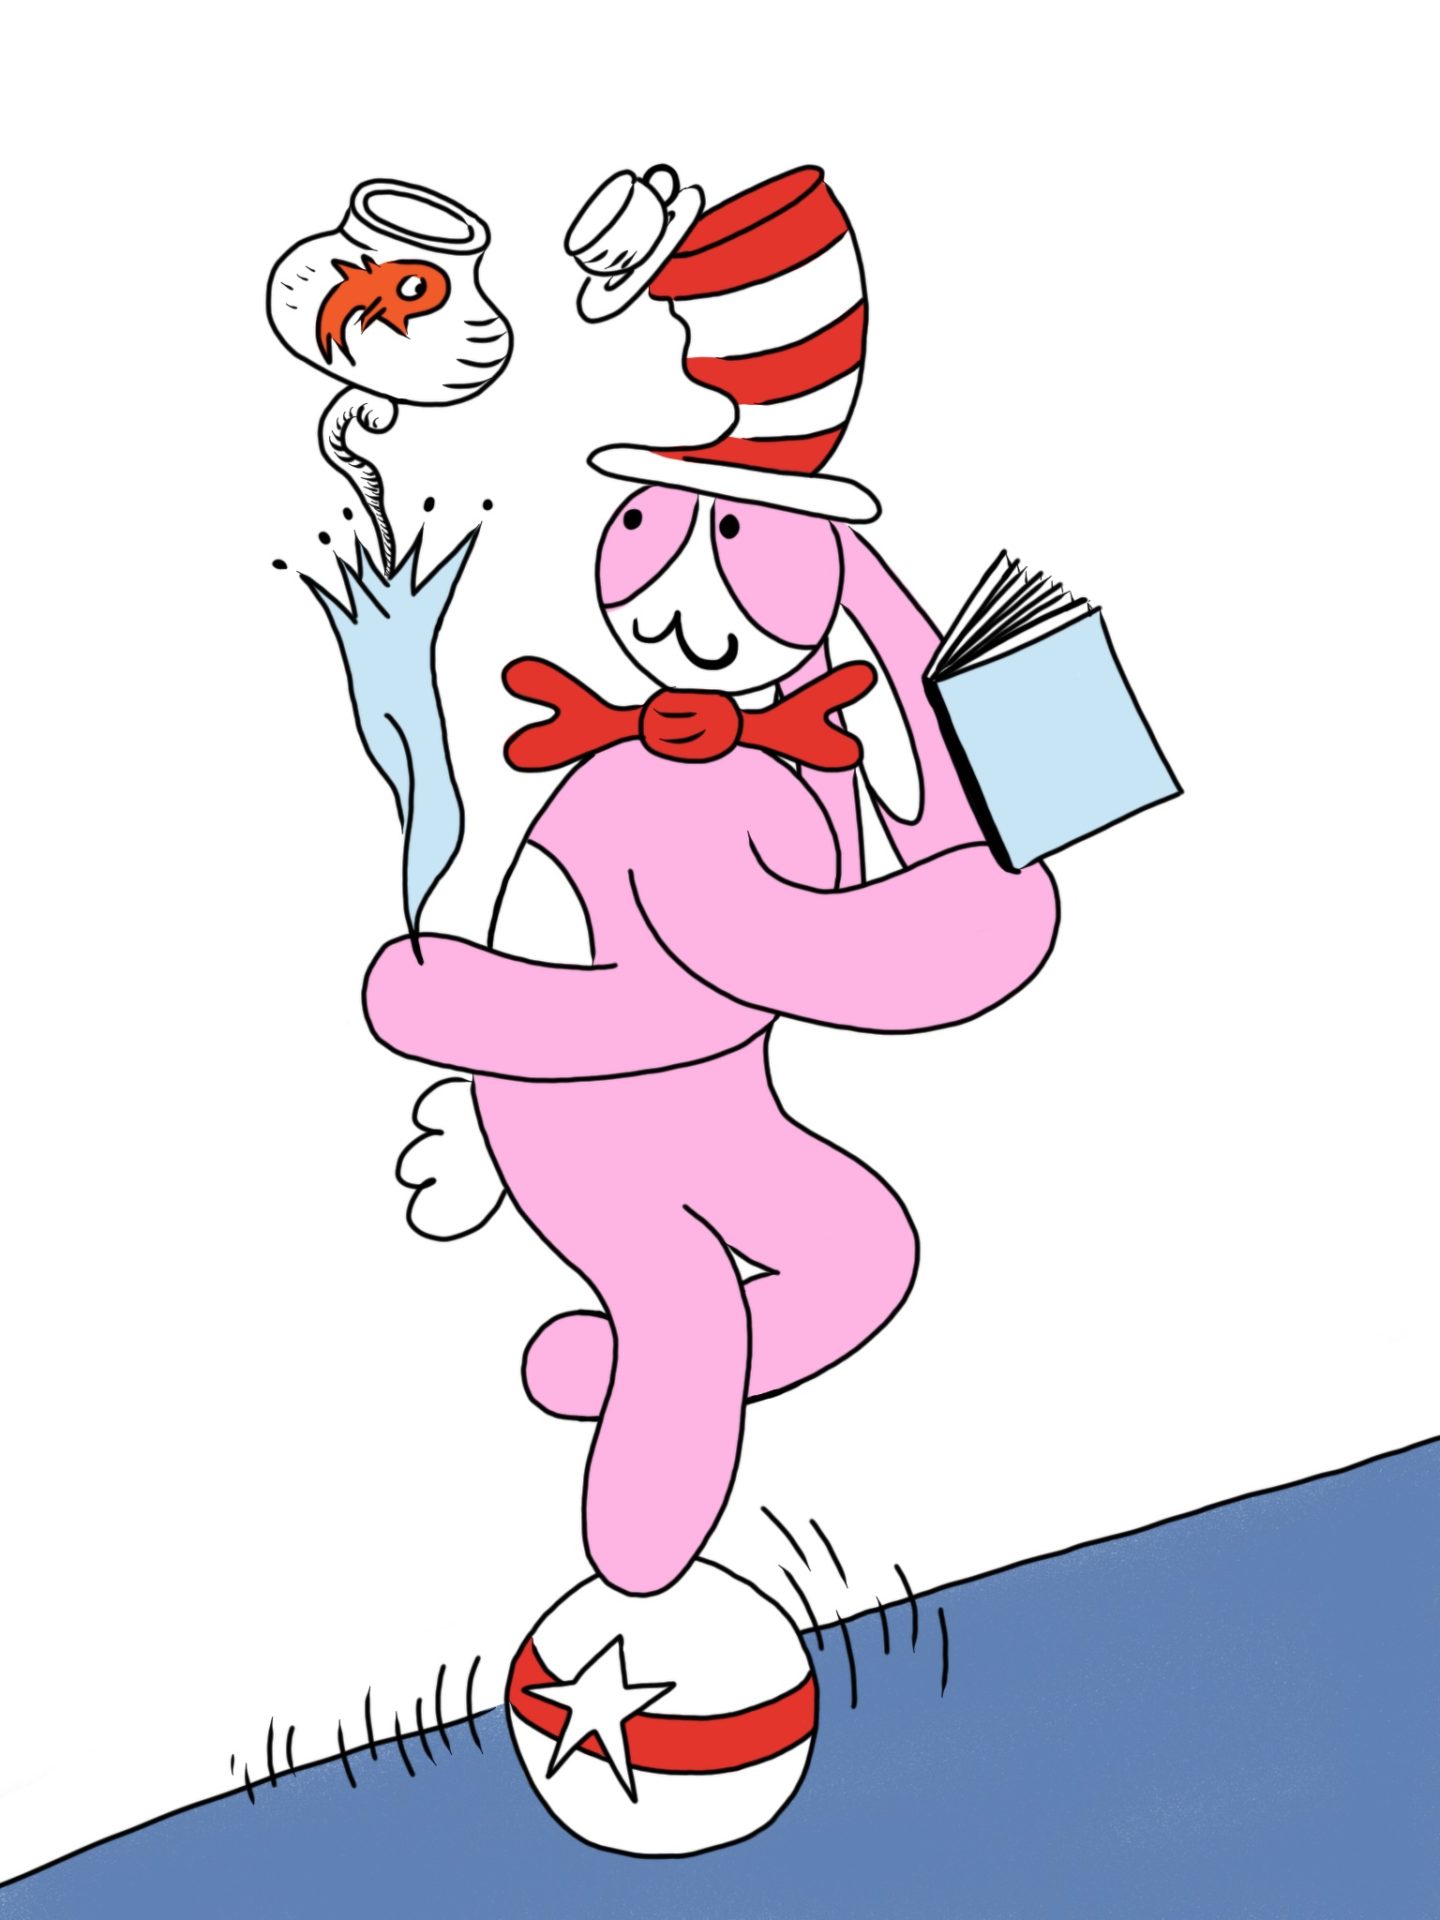 A Cat in the Hat by Dr Seuss tribute